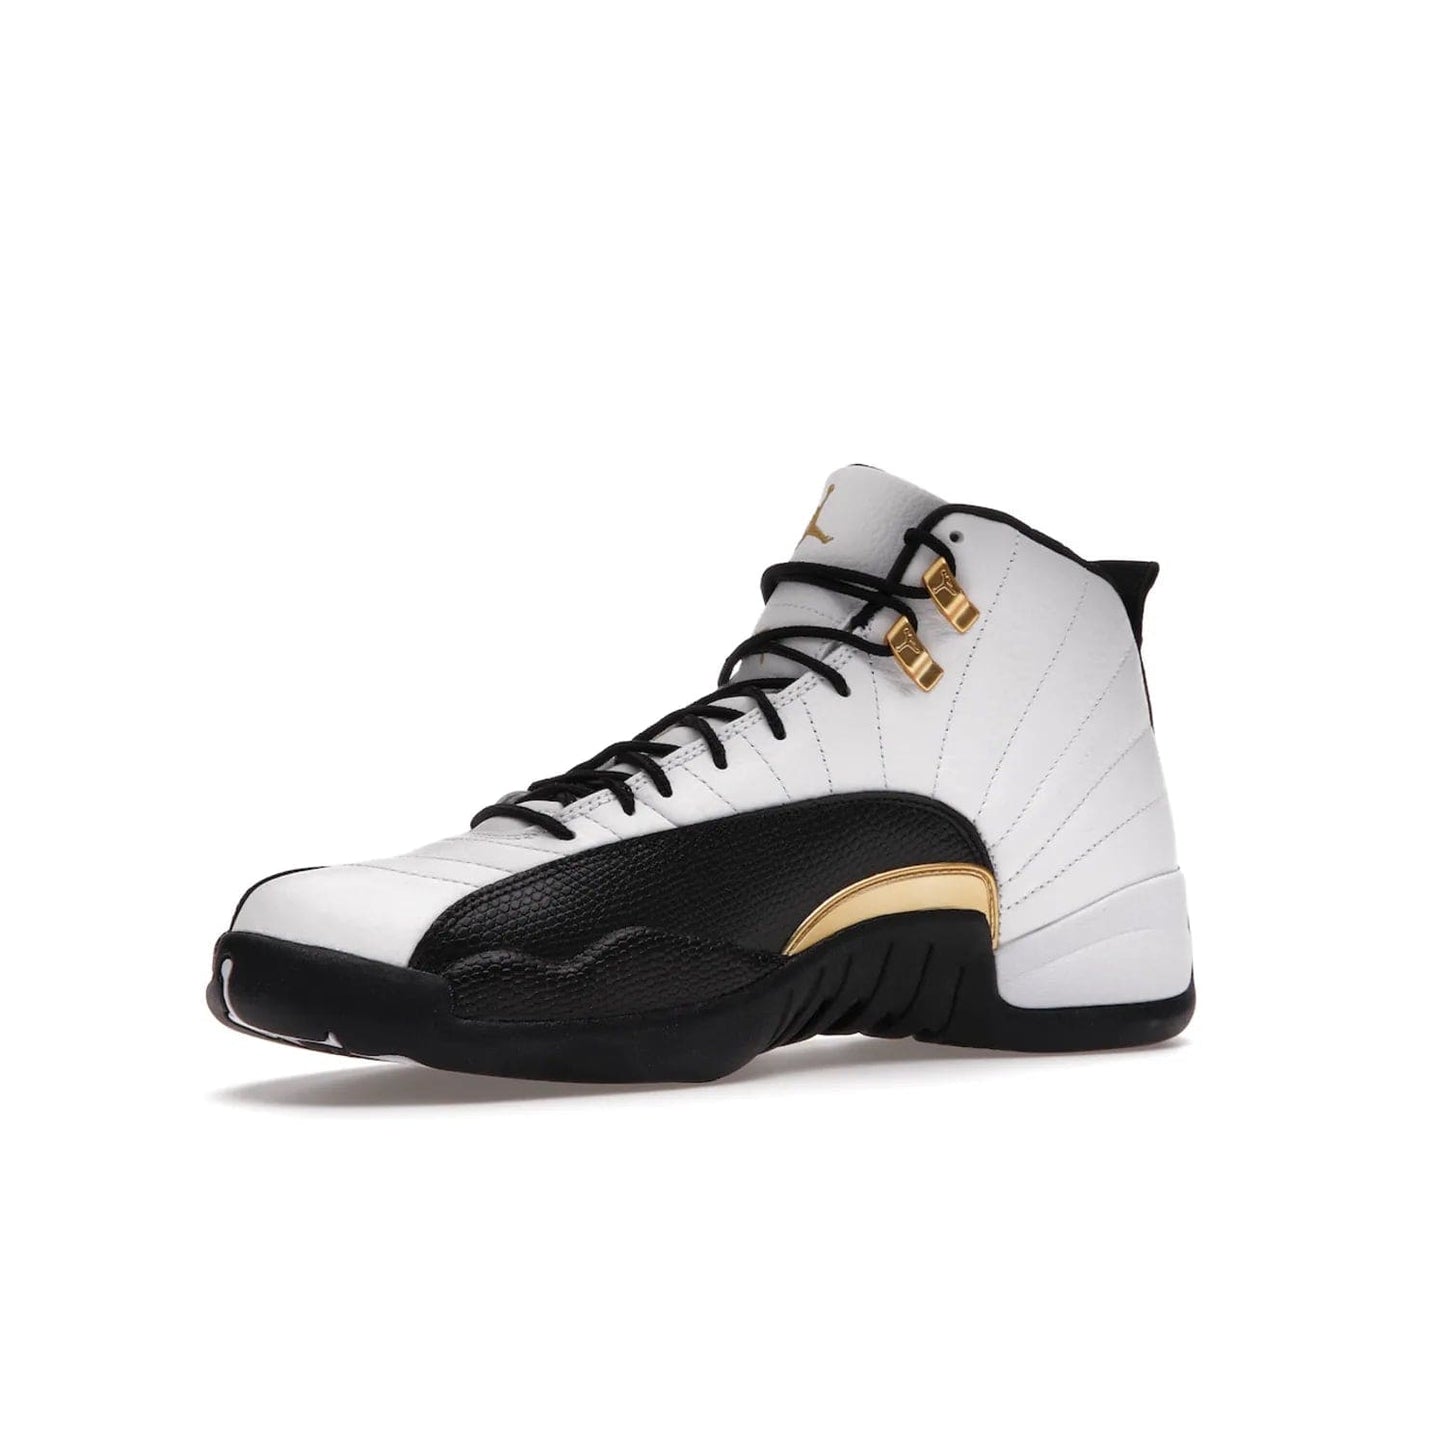 Jordan 12 Retro Royalty Taxi - Image 16 - Only at www.BallersClubKickz.com - Make a statement with the Air Jordan 12 Retro Royalty Taxi. Woven heel tag, gold plaquet, white tumbled leather upper plus a black toe wrap, make this modern take on the classic a must-have. Available in November 2021.